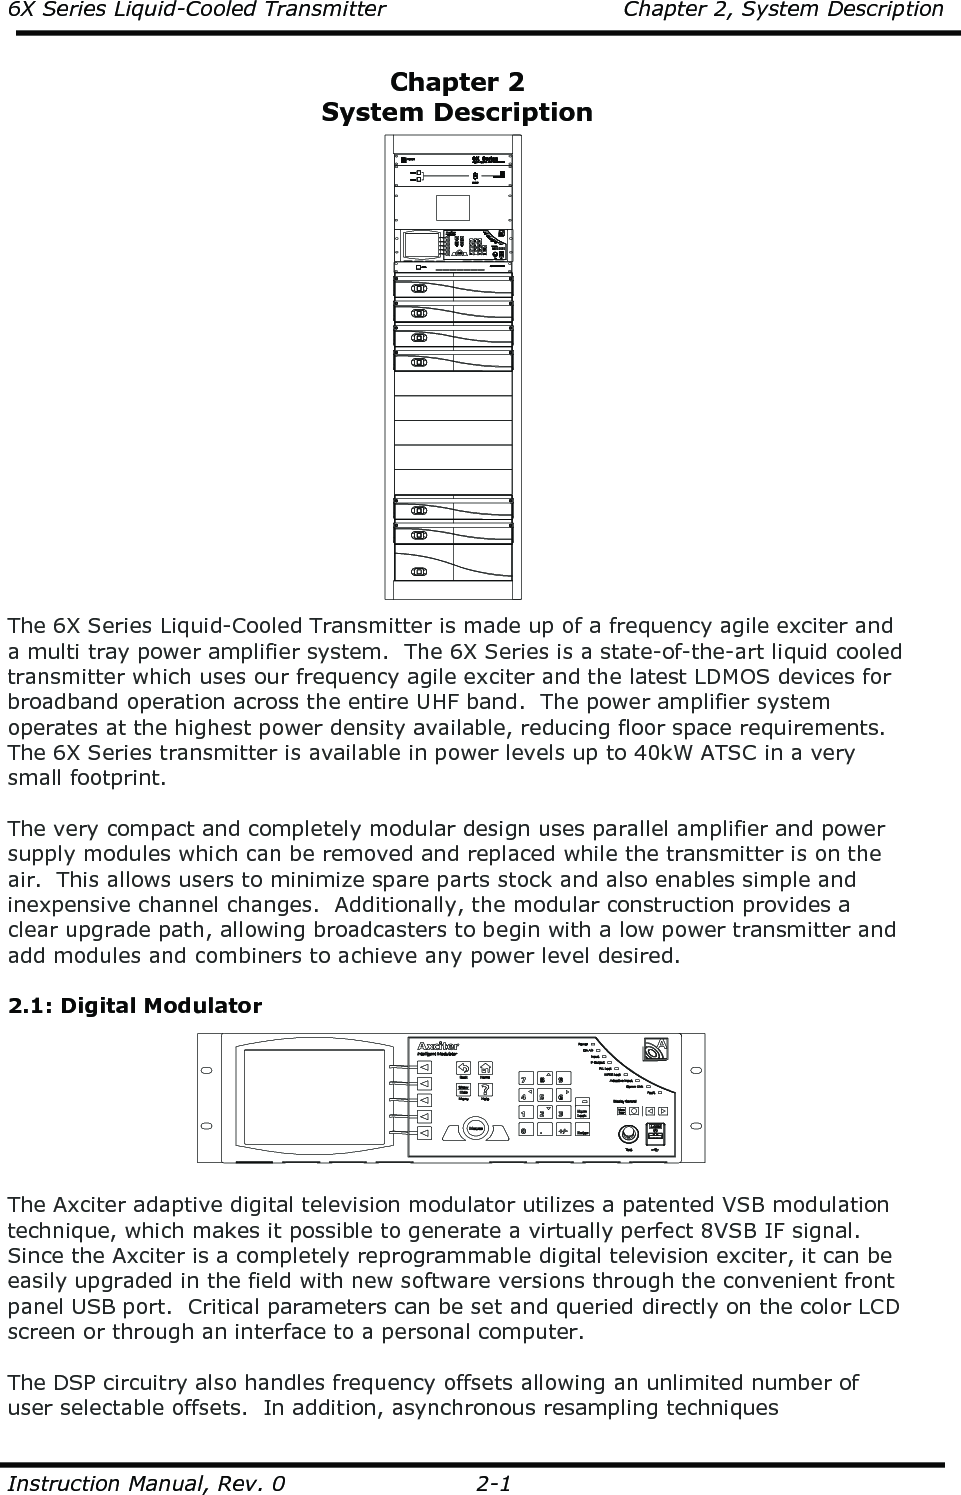 6X Series Liquid-Cooled Transmitter    Chapter 2, System Description  Instruction Manual, Rev. 0    2-1  Chapter 2 System Description  The 6X Series Liquid-Cooled Transmitter is made up of a frequency agile exciter and a multi tray power amplifier system.  The 6X Series is a state-of-the-art liquid cooled transmitter which uses our frequency agile exciter and the latest LDMOS devices for broadband operation across the entire UHF band.  The power amplifier system operates at the highest power density available, reducing floor space requirements.  The 6X Series transmitter is available in power levels up to 40kW ATSC in a very small footprint.  The very compact and completely modular design uses parallel amplifier and power supply modules which can be removed and replaced while the transmitter is on the air.  This allows users to minimize spare parts stock and also enables simple and inexpensive channel changes.  Additionally, the modular construction provides a clear upgrade path, allowing broadcasters to begin with a low power transmitter and add modules and combiners to achieve any power level desired.   2.1: Digital Modulator  The Axciter adaptive digital television modulator utilizes a patented VSB modulation technique, which makes it possible to generate a virtually perfect 8VSB IF signal. Since the Axciter is a completely reprogrammable digital television exciter, it can be easily upgraded in the field with new software versions through the convenient front panel USB port.  Critical parameters can be set and queried directly on the color LCD screen or through an interface to a personal computer.   The DSP circuitry also handles frequency offsets allowing an unlimited number of user selectable offsets.  In addition, asynchronous resampling techniques 